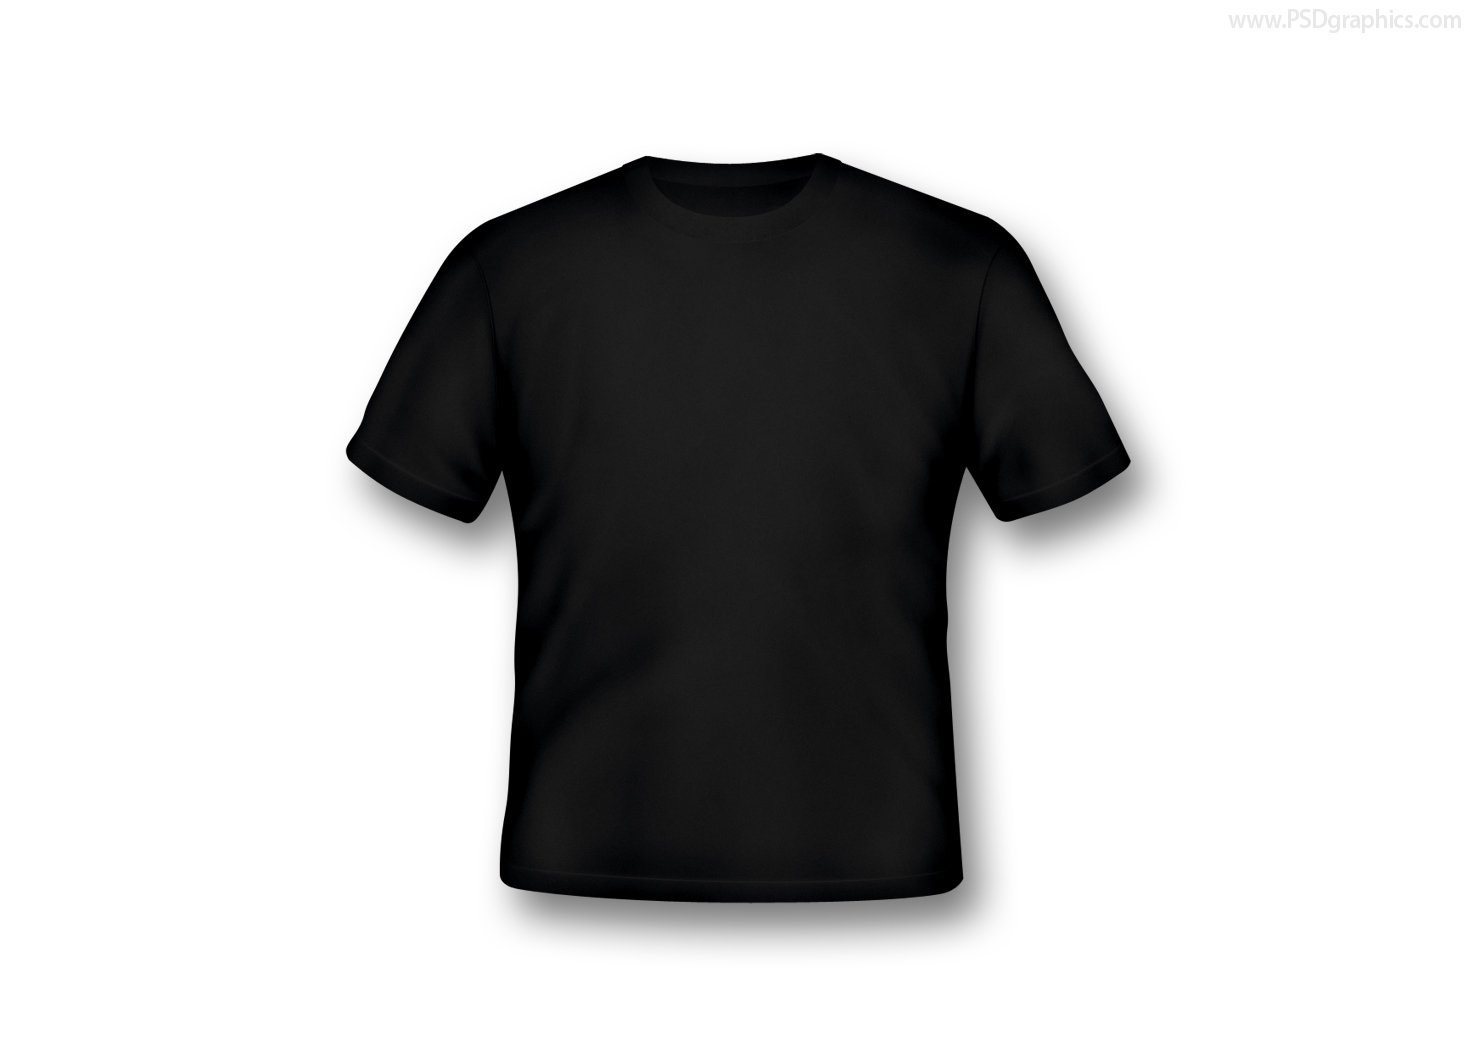 Download Blank t-shirts in various colors | PSDGraphics